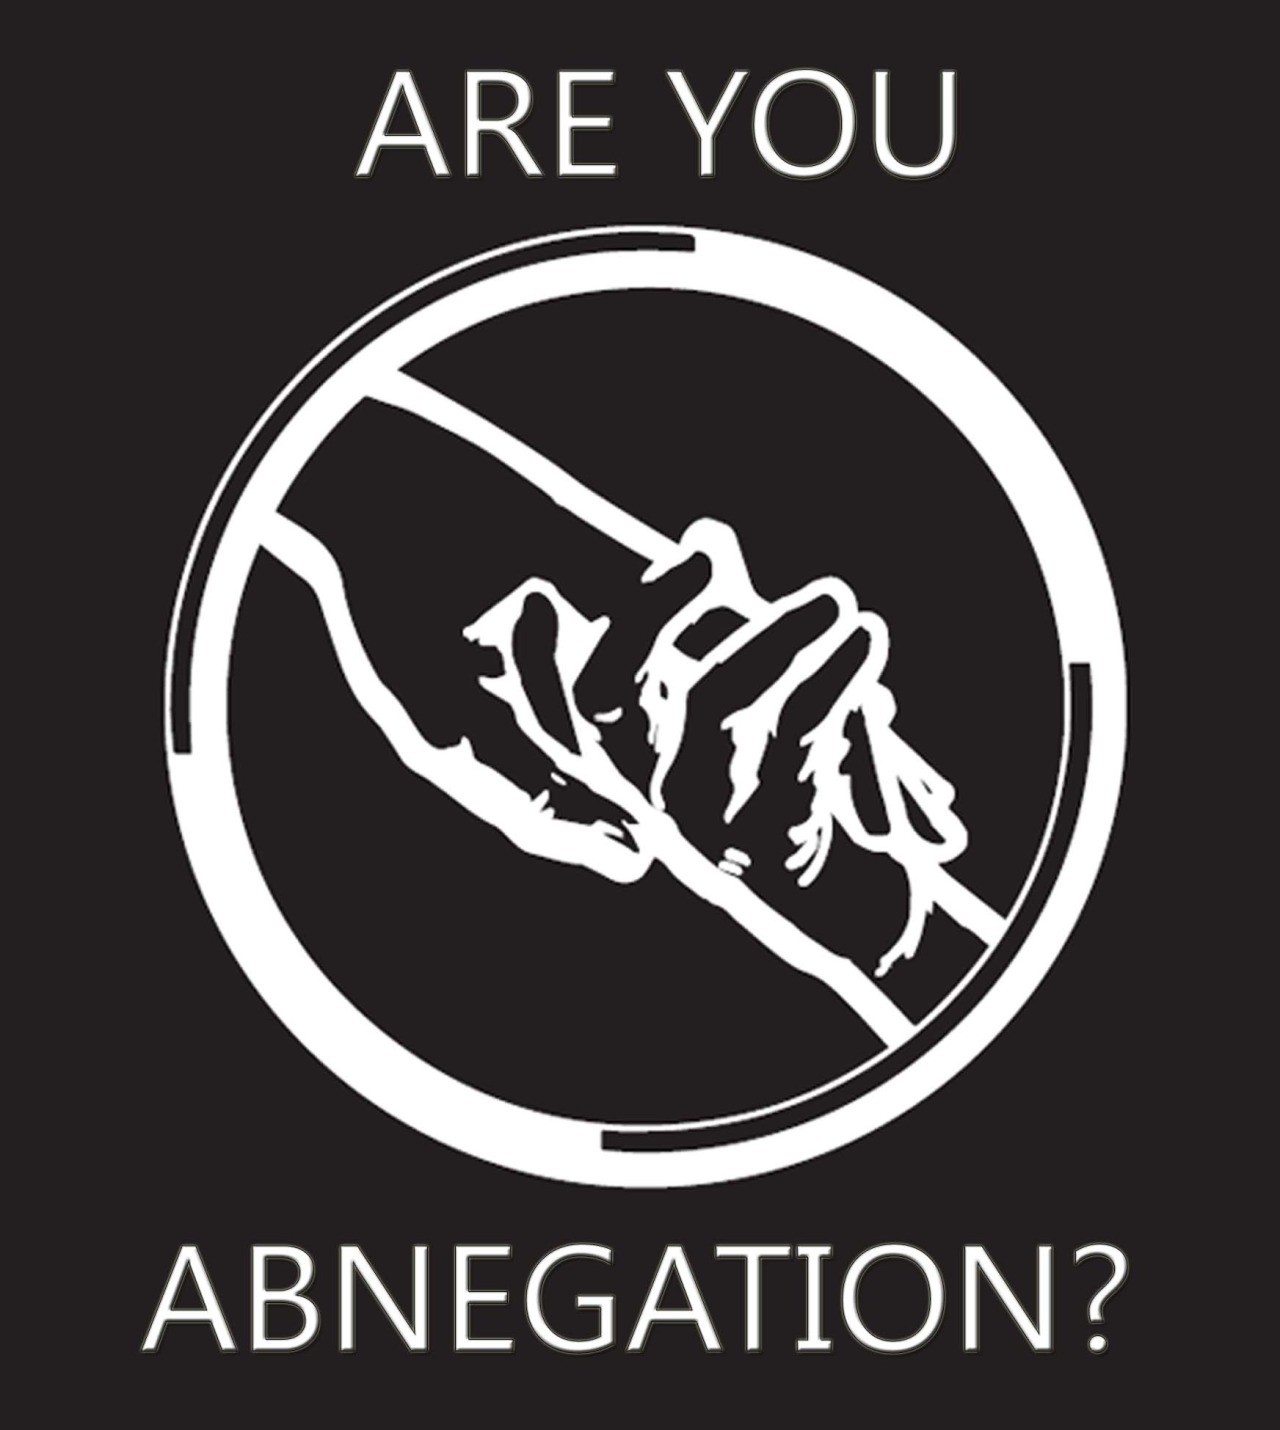 Are you Abnegation?